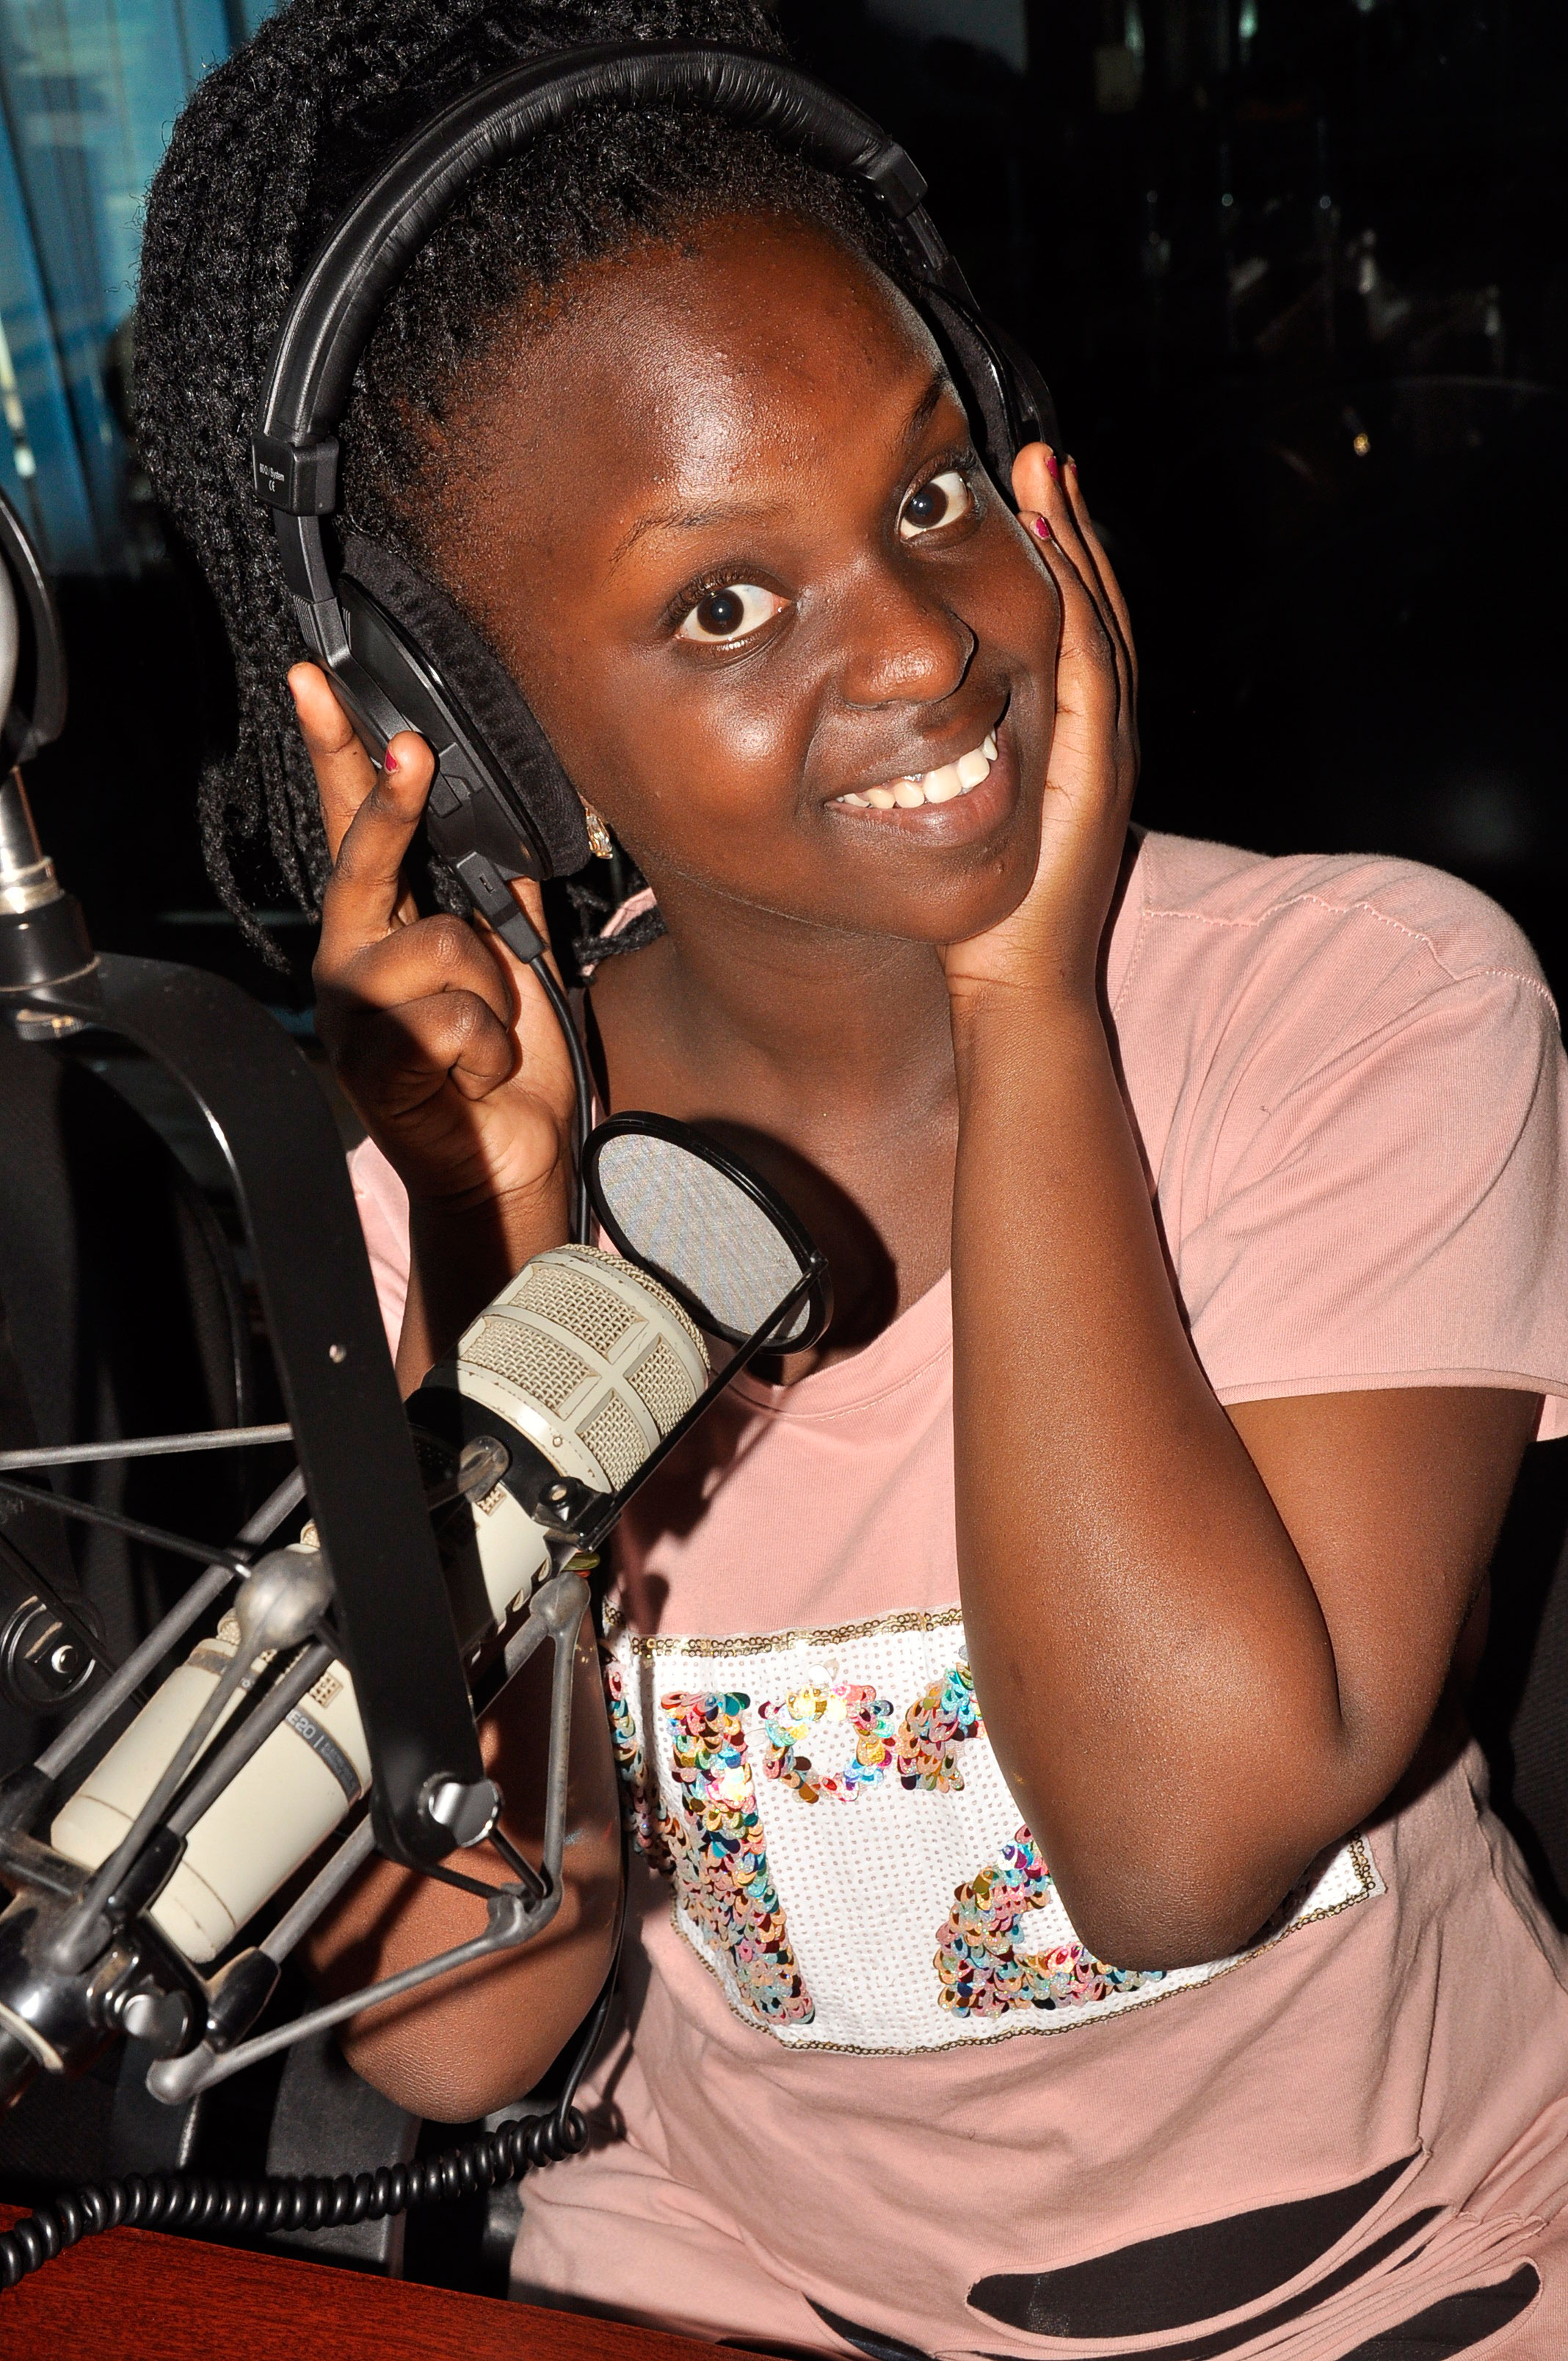 Baby Gloria during an interview at 93.3 KFM studios. Photo by Stephen Otage